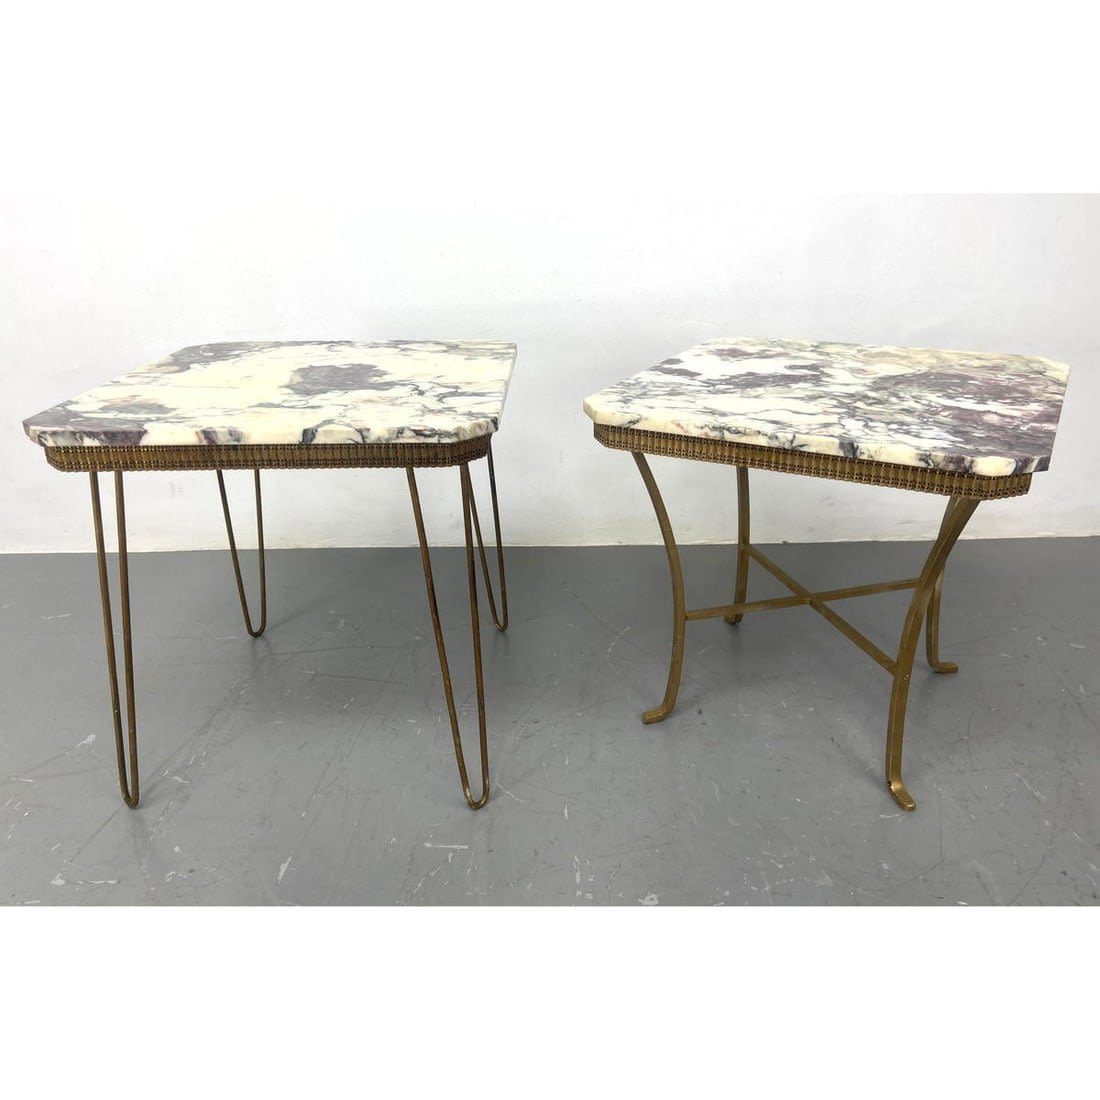 2pcs Marble Top Metal Base Side Tables.